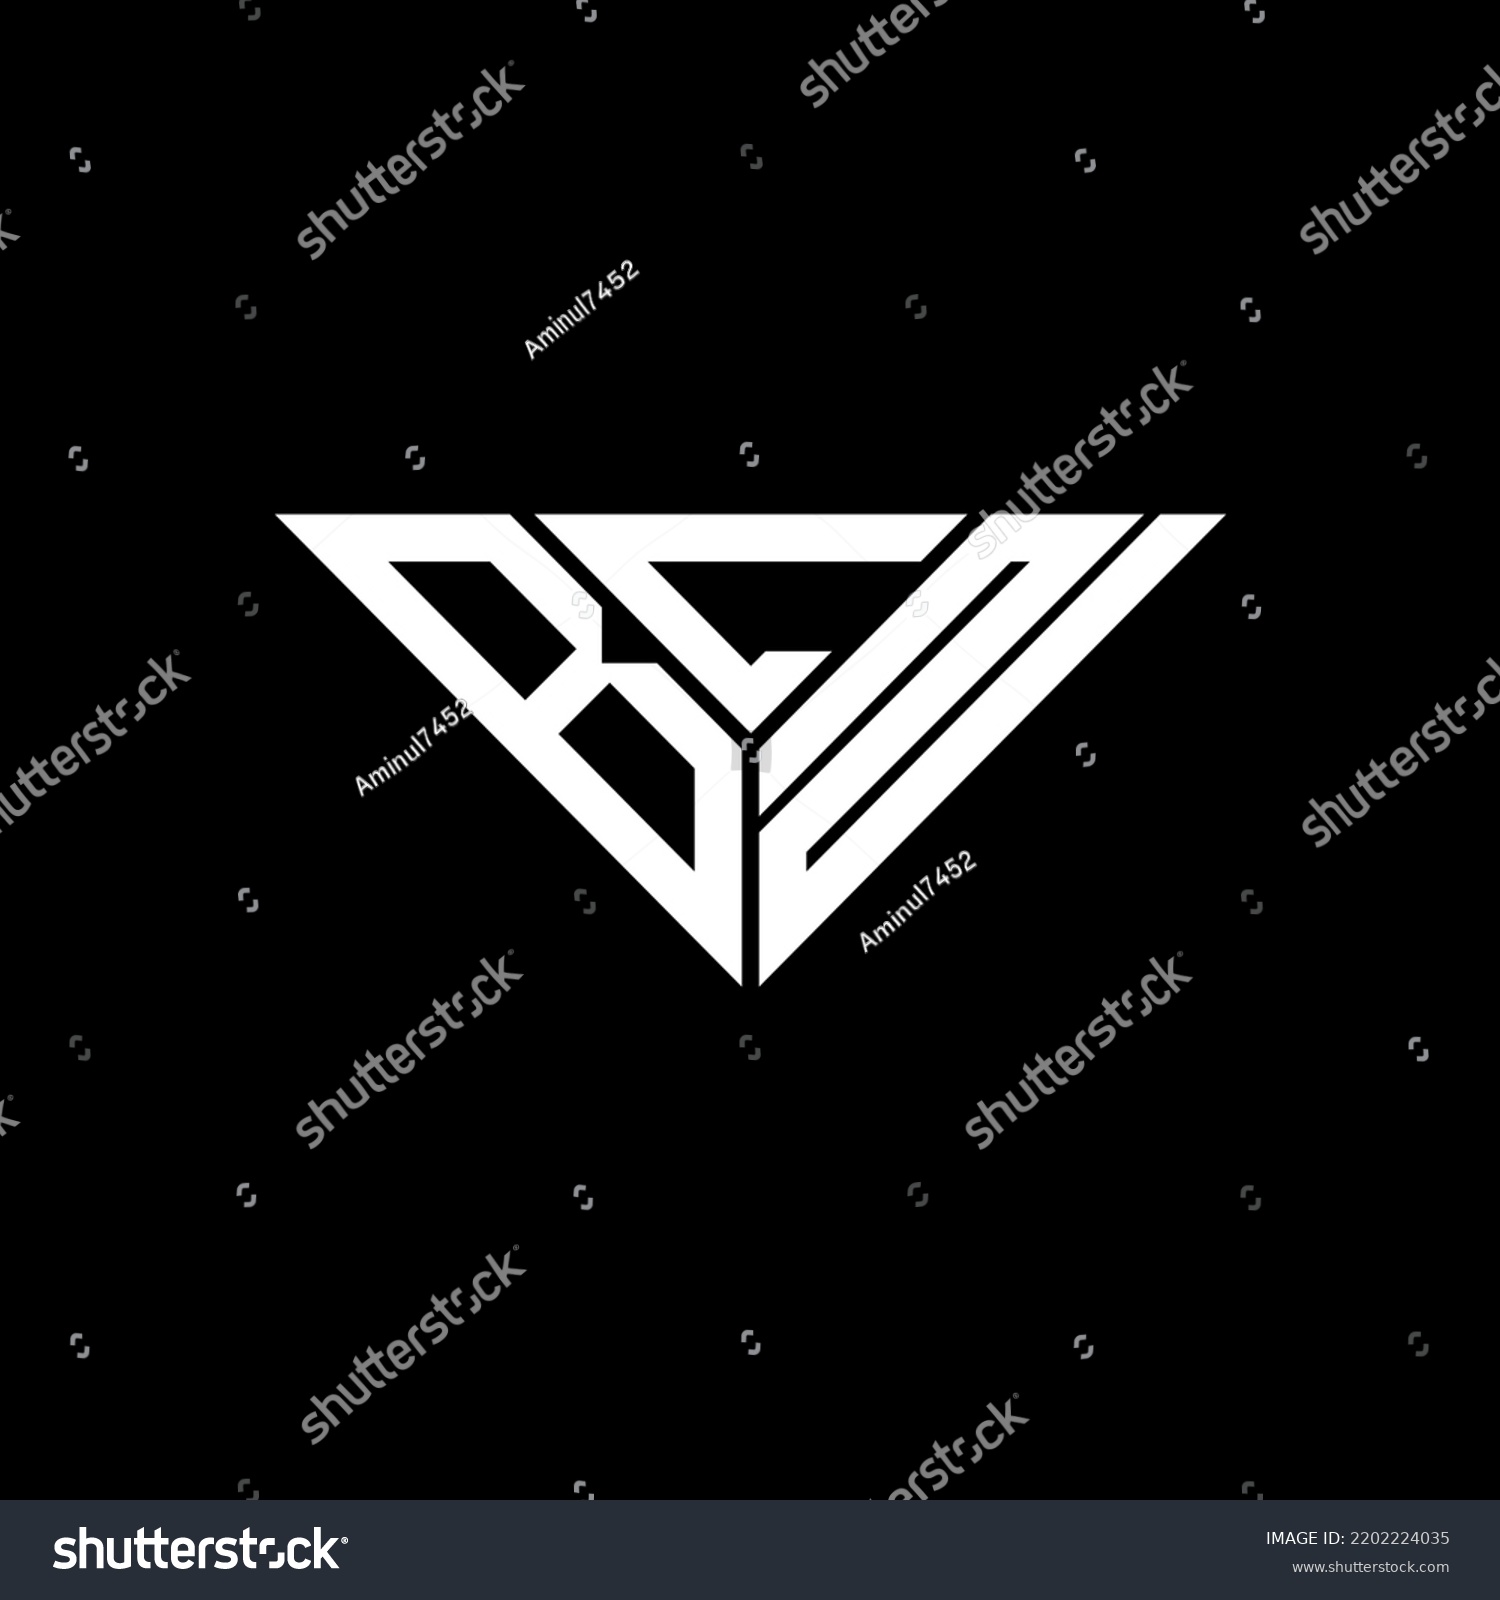 SVG of BCN letter logo creative design with vector graphic, BCN simple and modern logo in triangle shape. svg